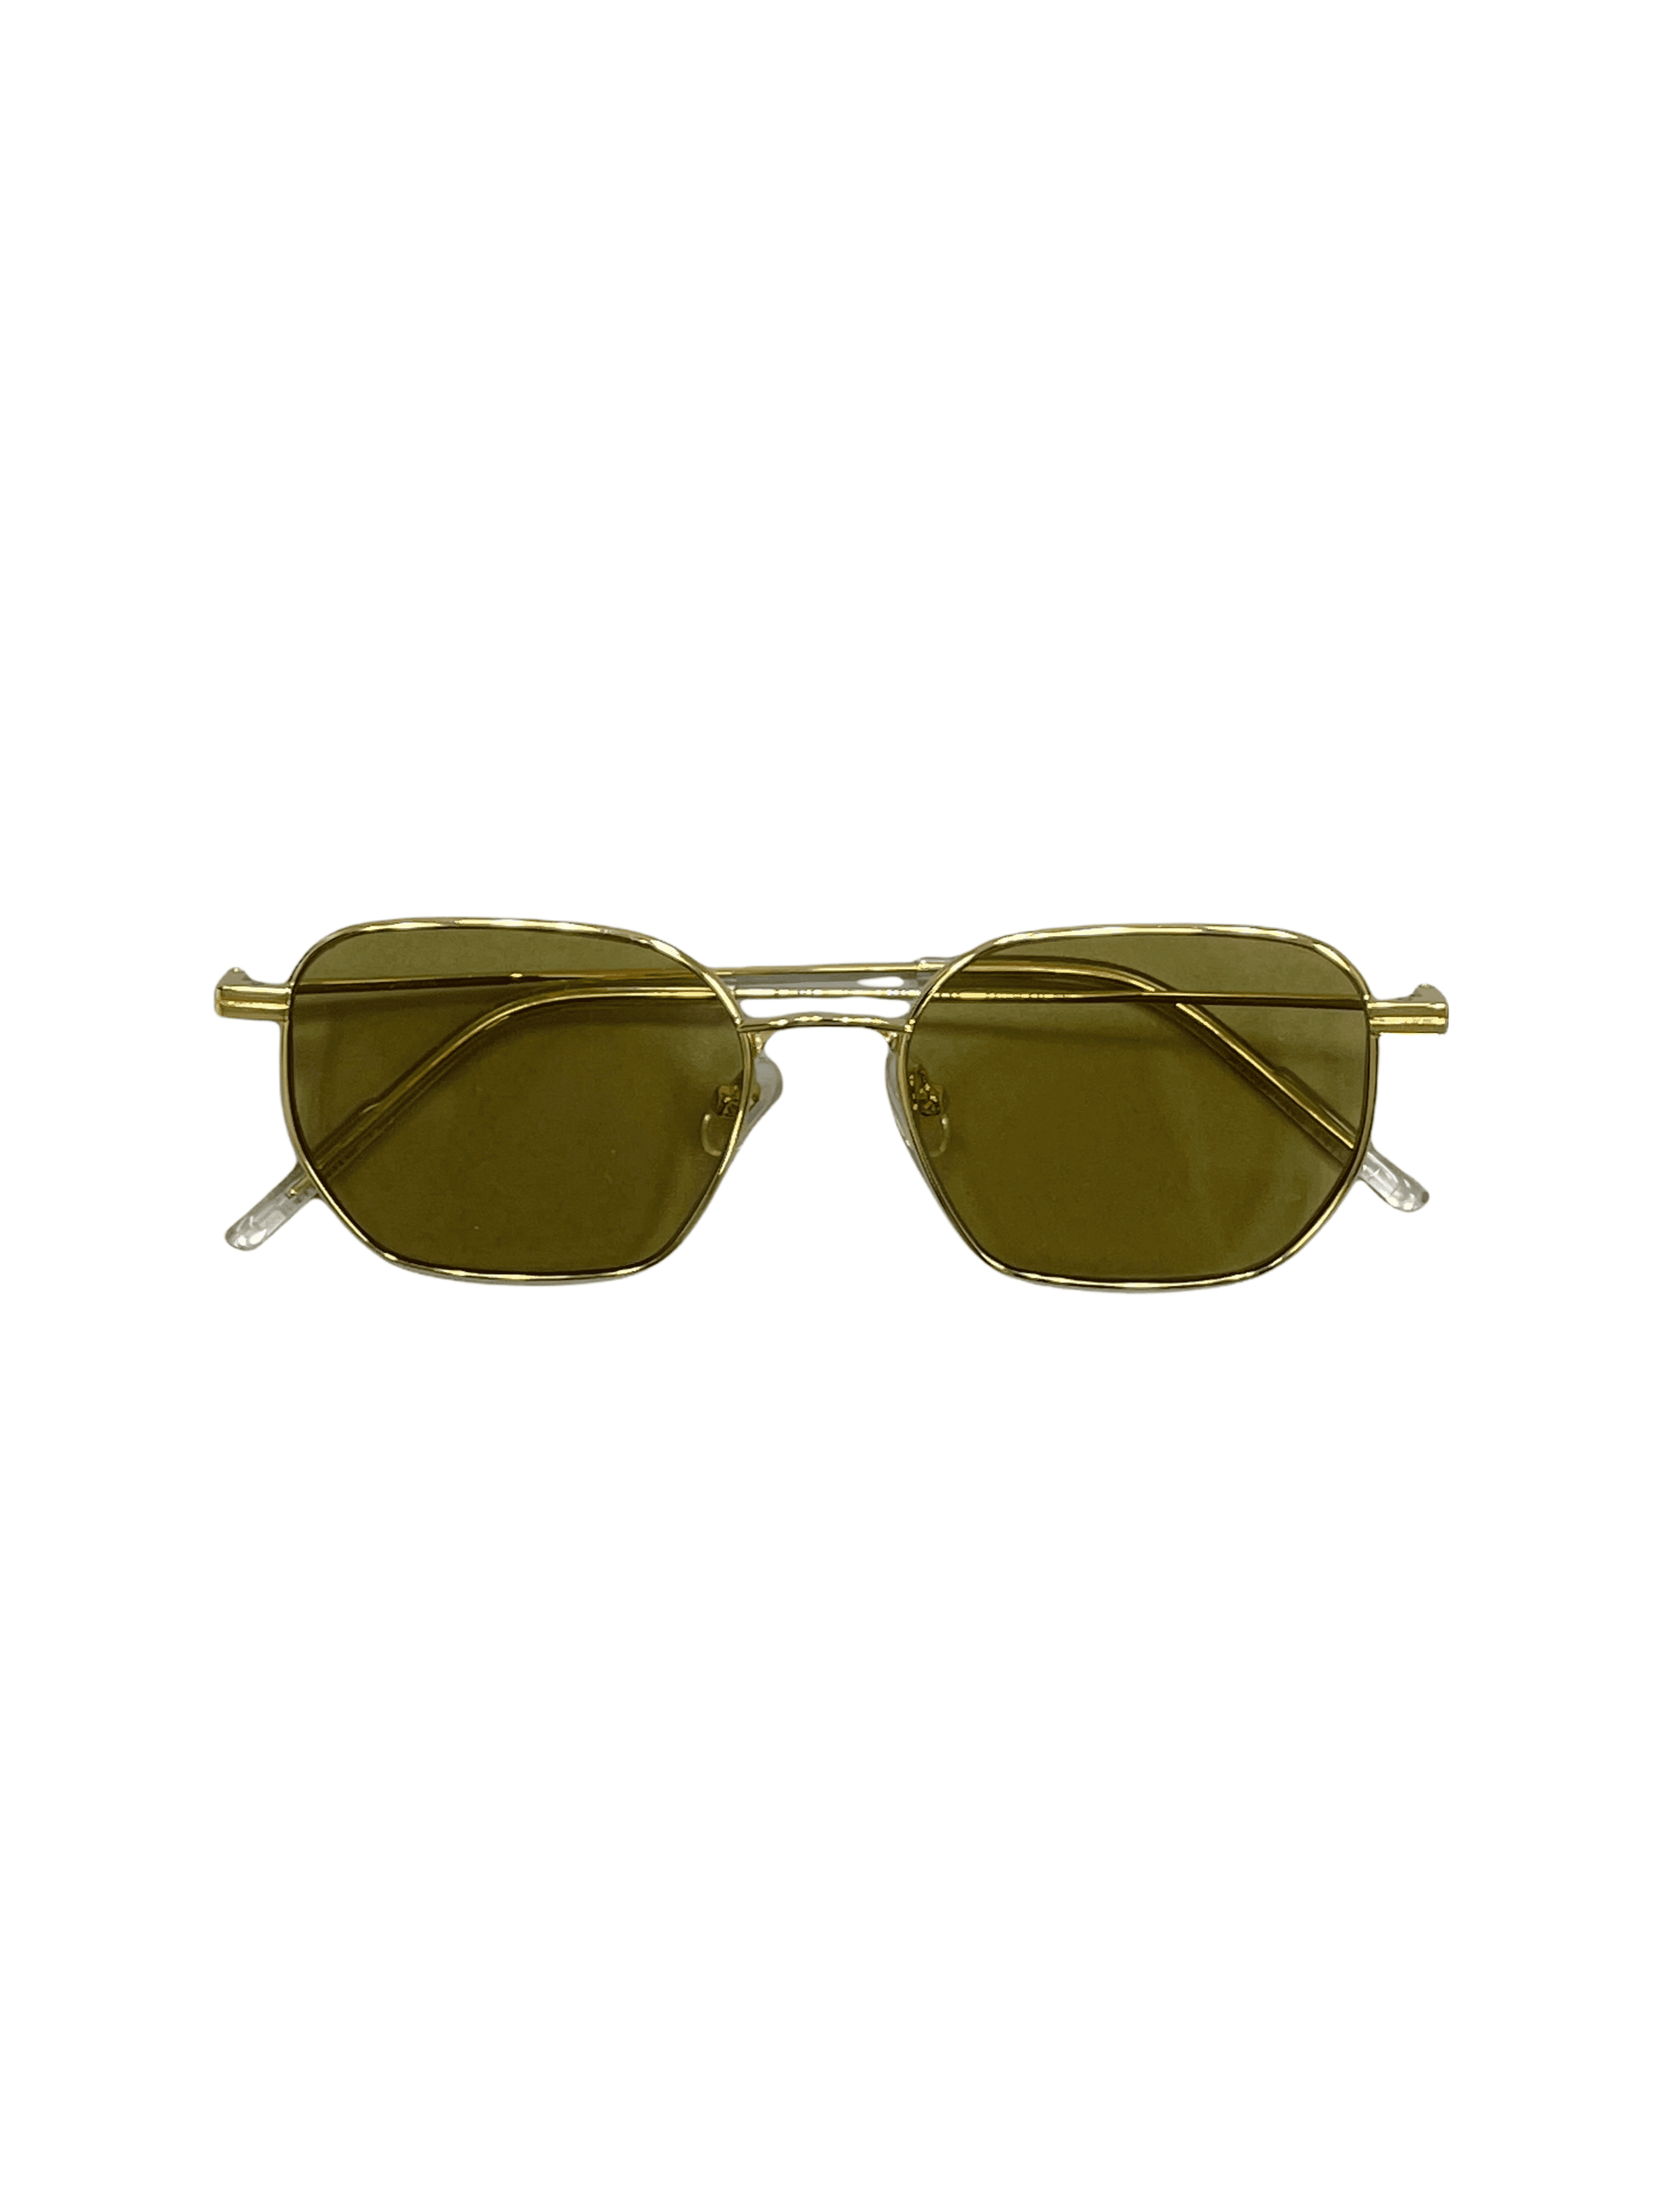 Gentle Monster Gold Metal Frame & Orange Lens Sunglasses - Genuine Design luxury consignment Calgary, Alberta, Canada New and pre-owned clothing, shoes, accessories.